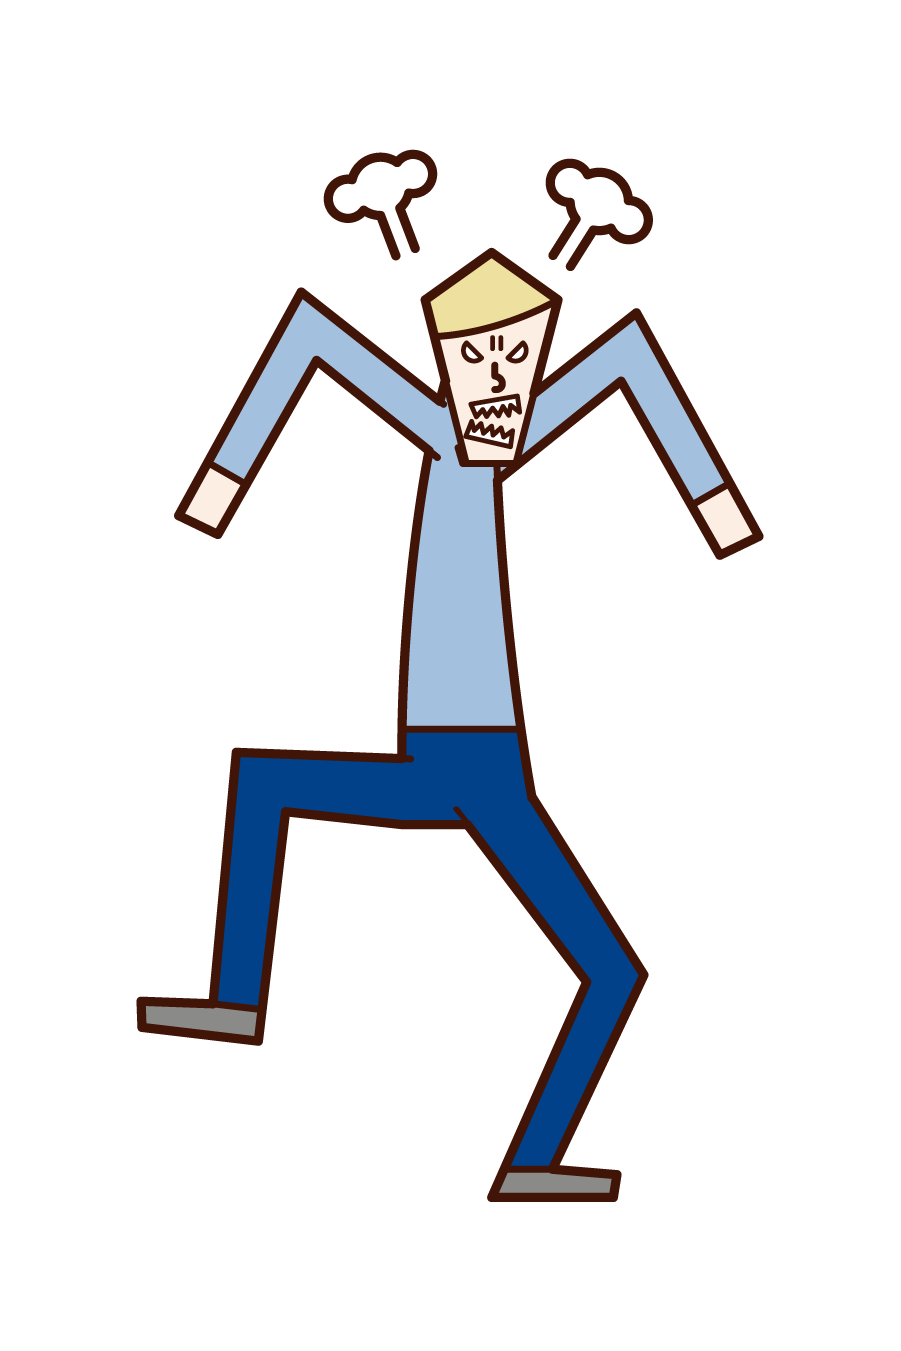 Illustration of an angry man